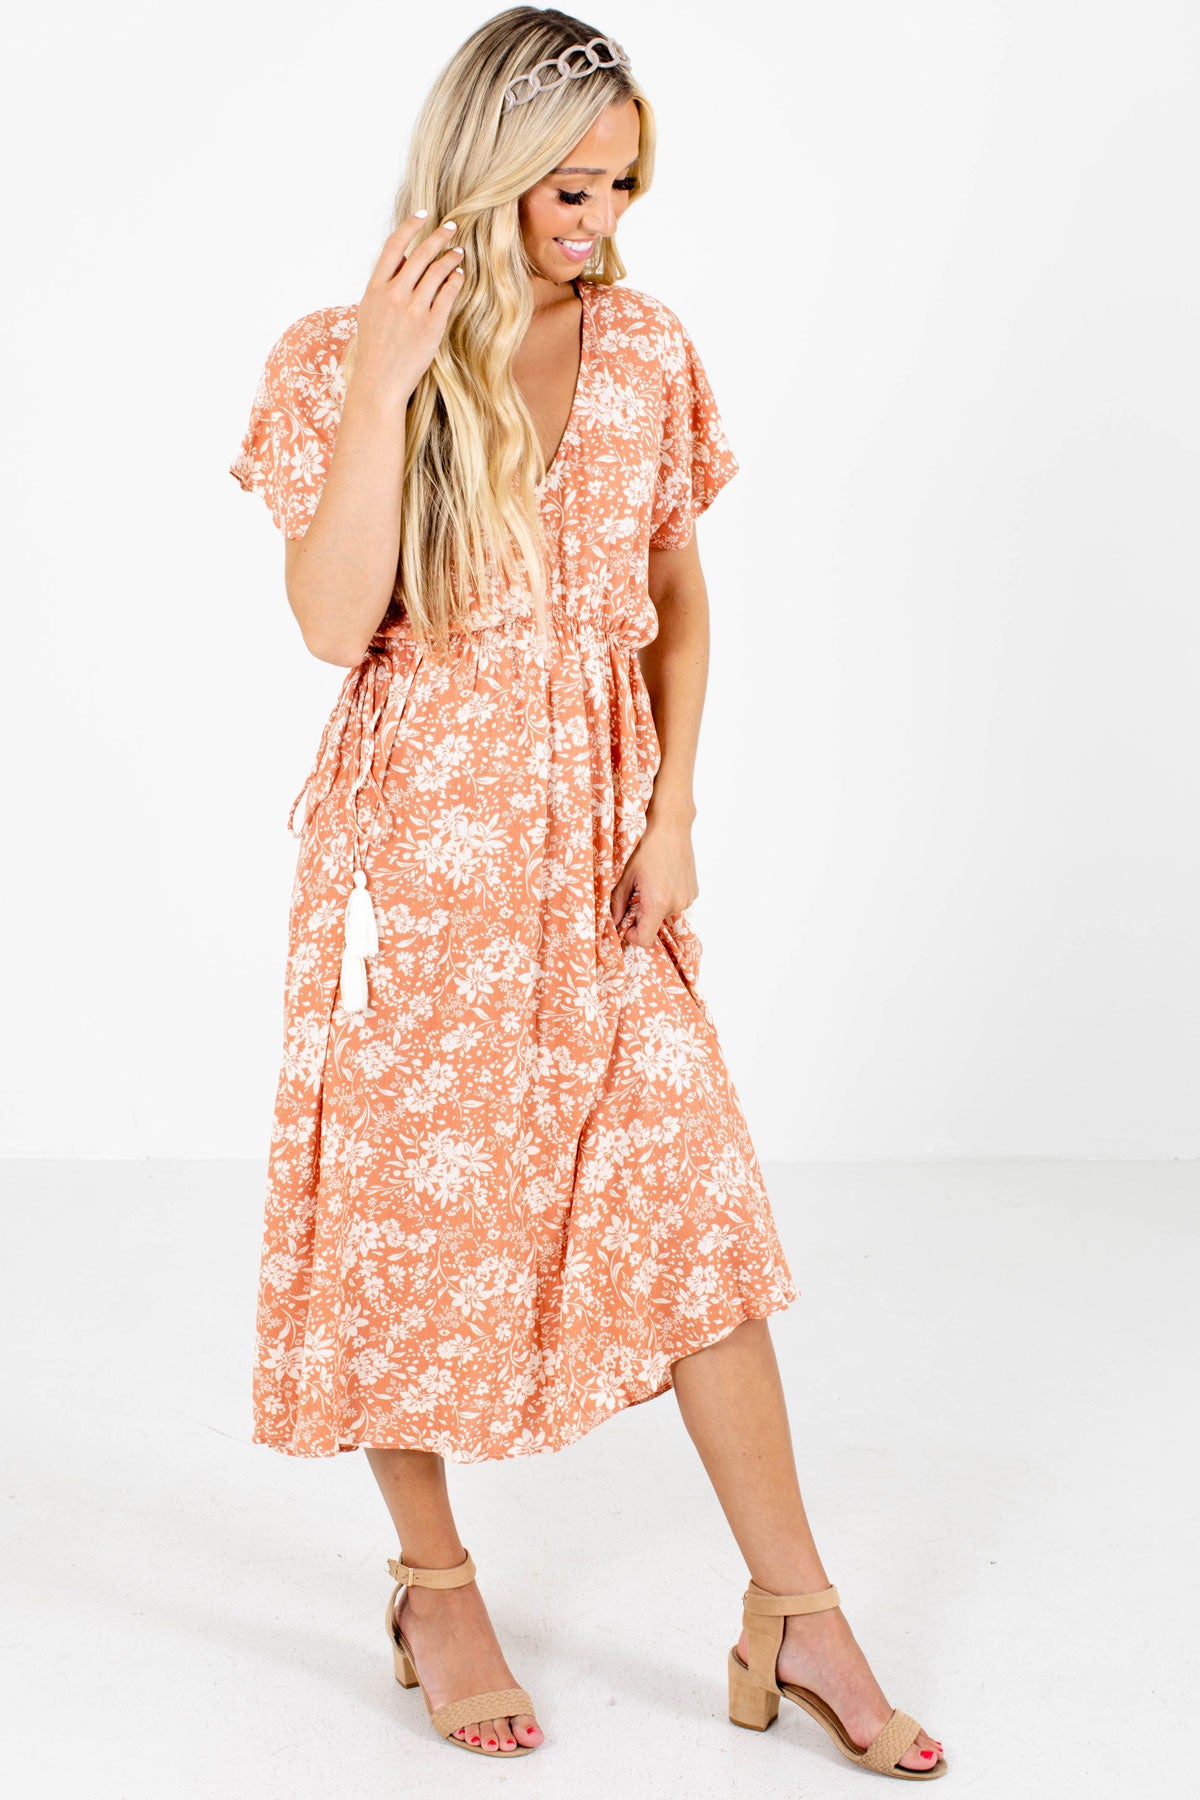 Pink and White Floral Patterned Boutique Midi Dresses for Women